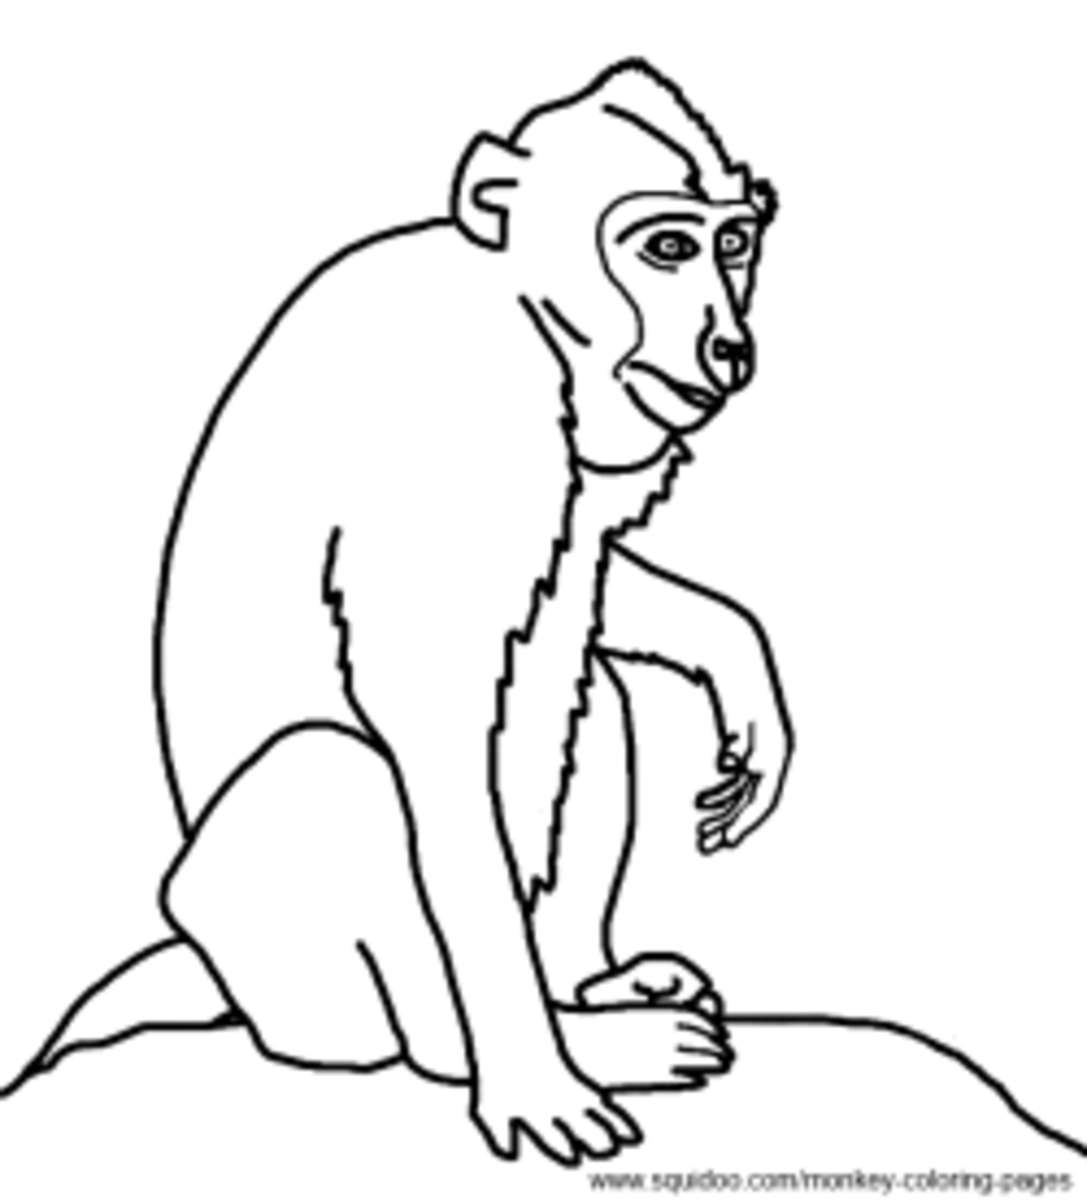 Old World Monkey Coloring Pages